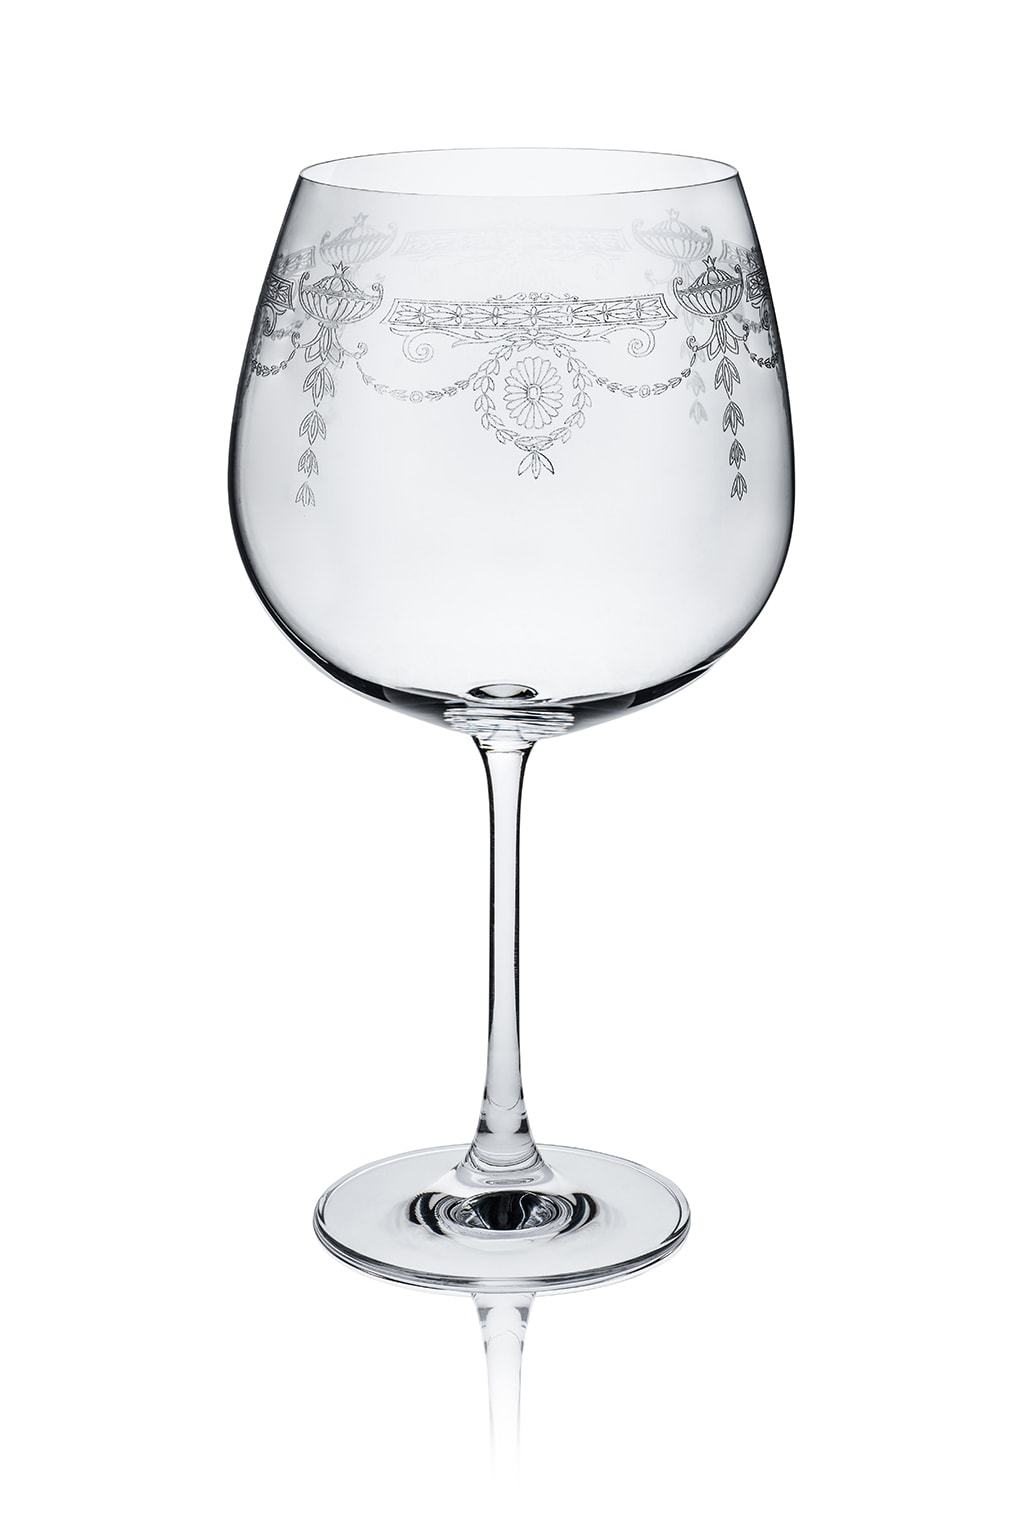 Catherine Gin Glass, part of set of 6 drinking glasses